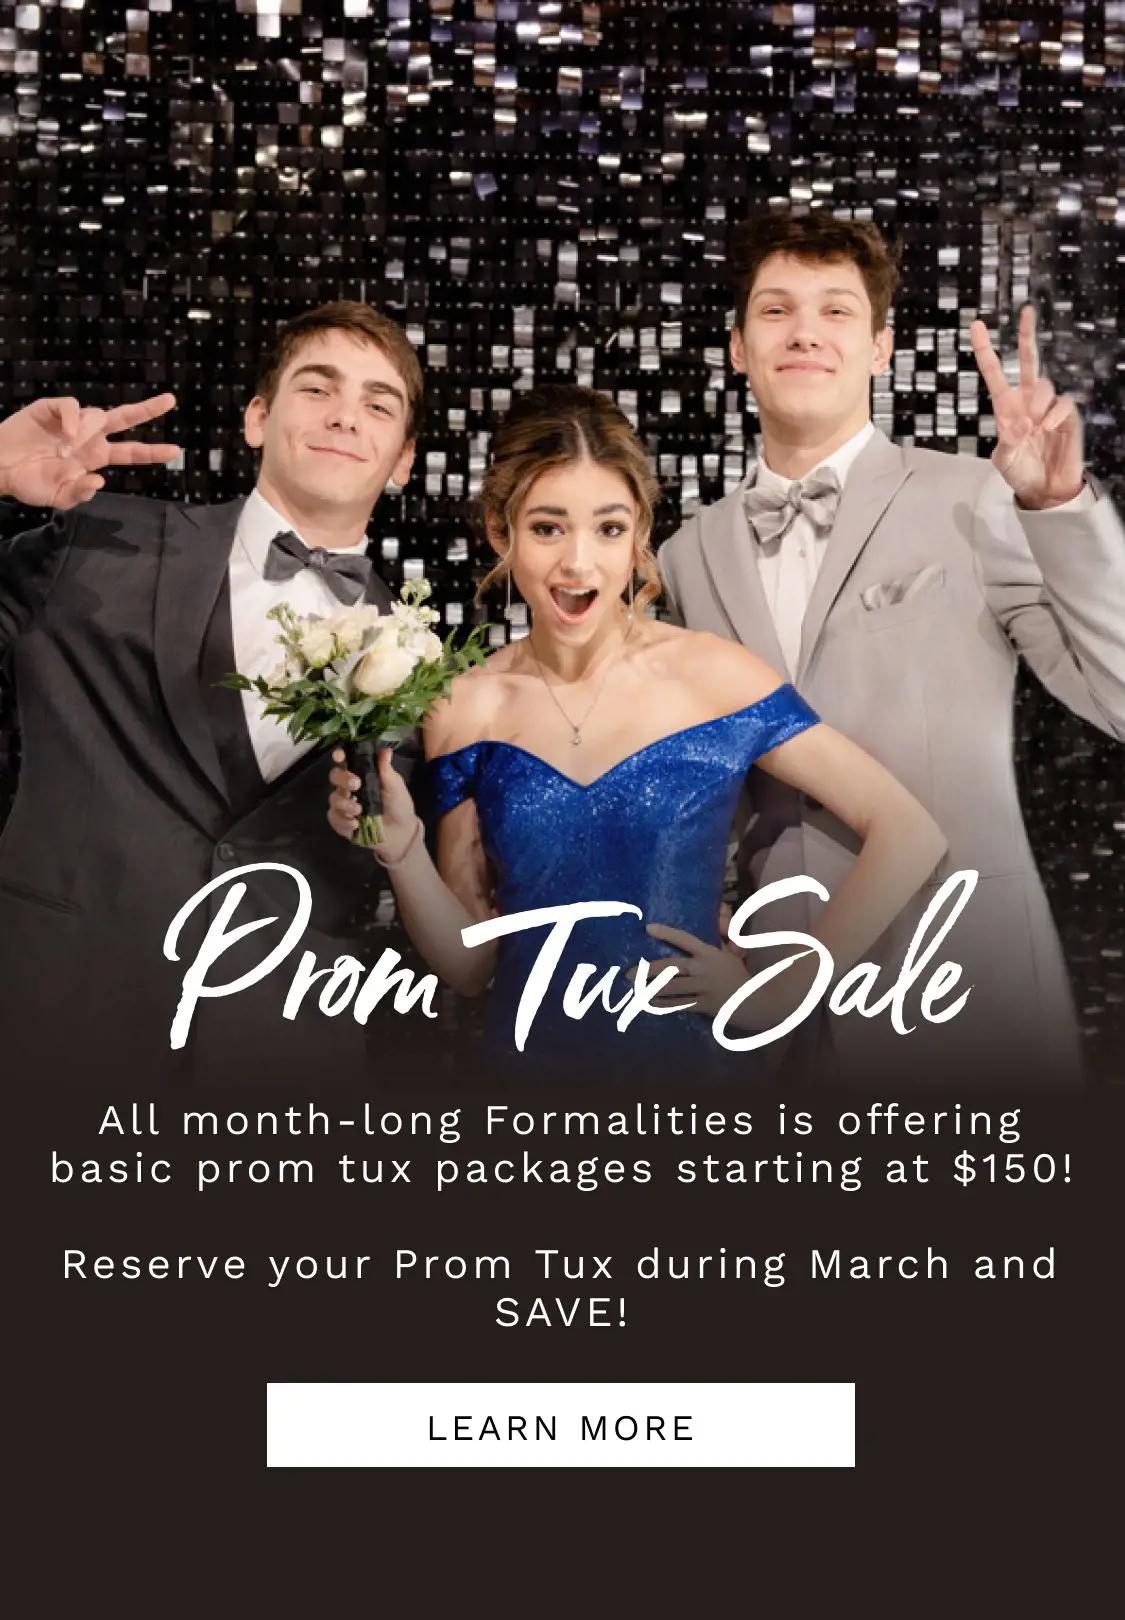 "Prom Tux Sale" banner for mobile